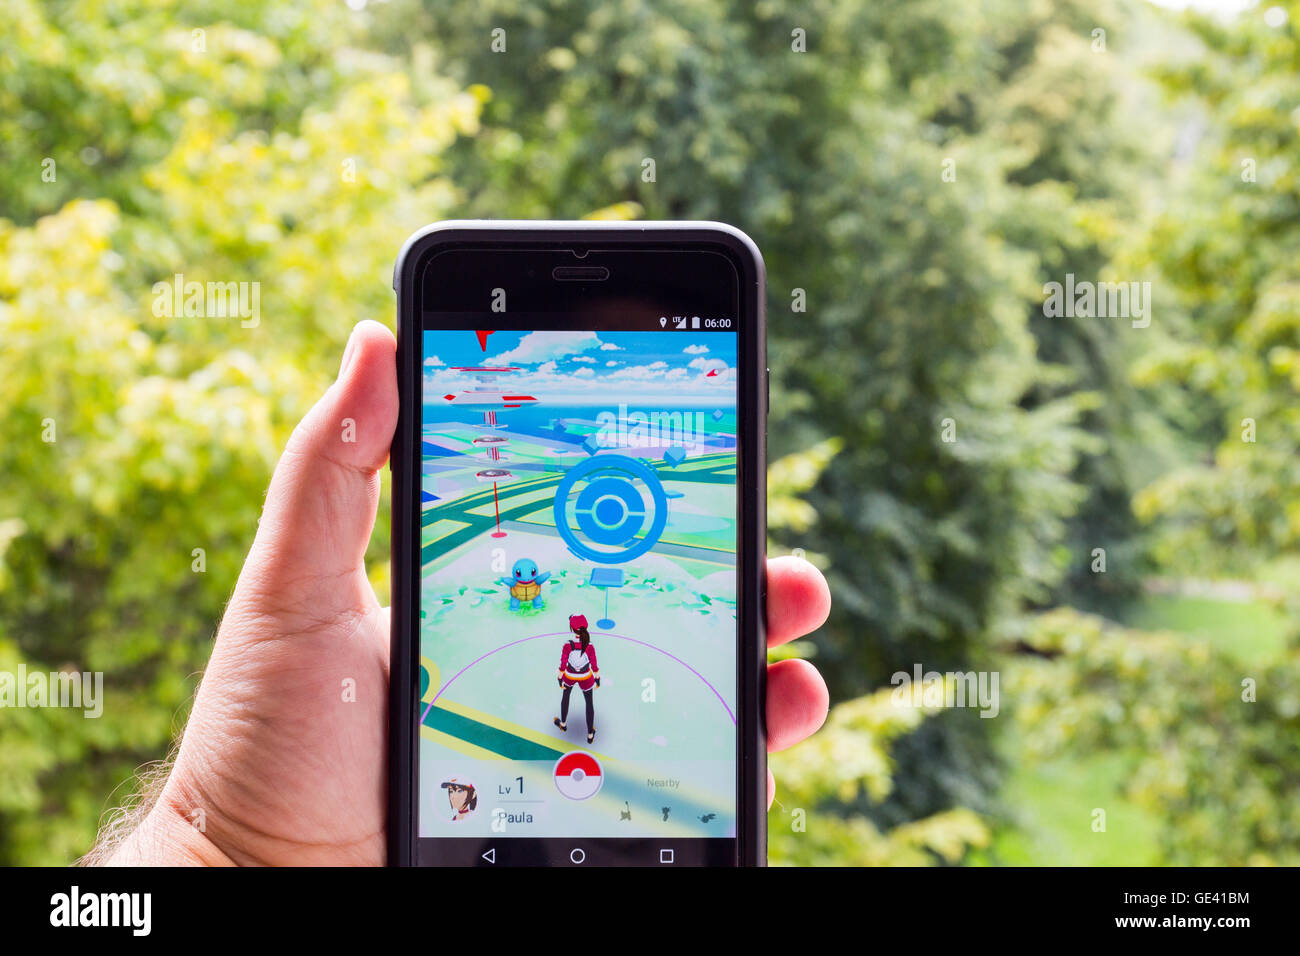 Apple iPhone6 Plus held in one hand showing its screen with Pokemon Go application. Stock Photo